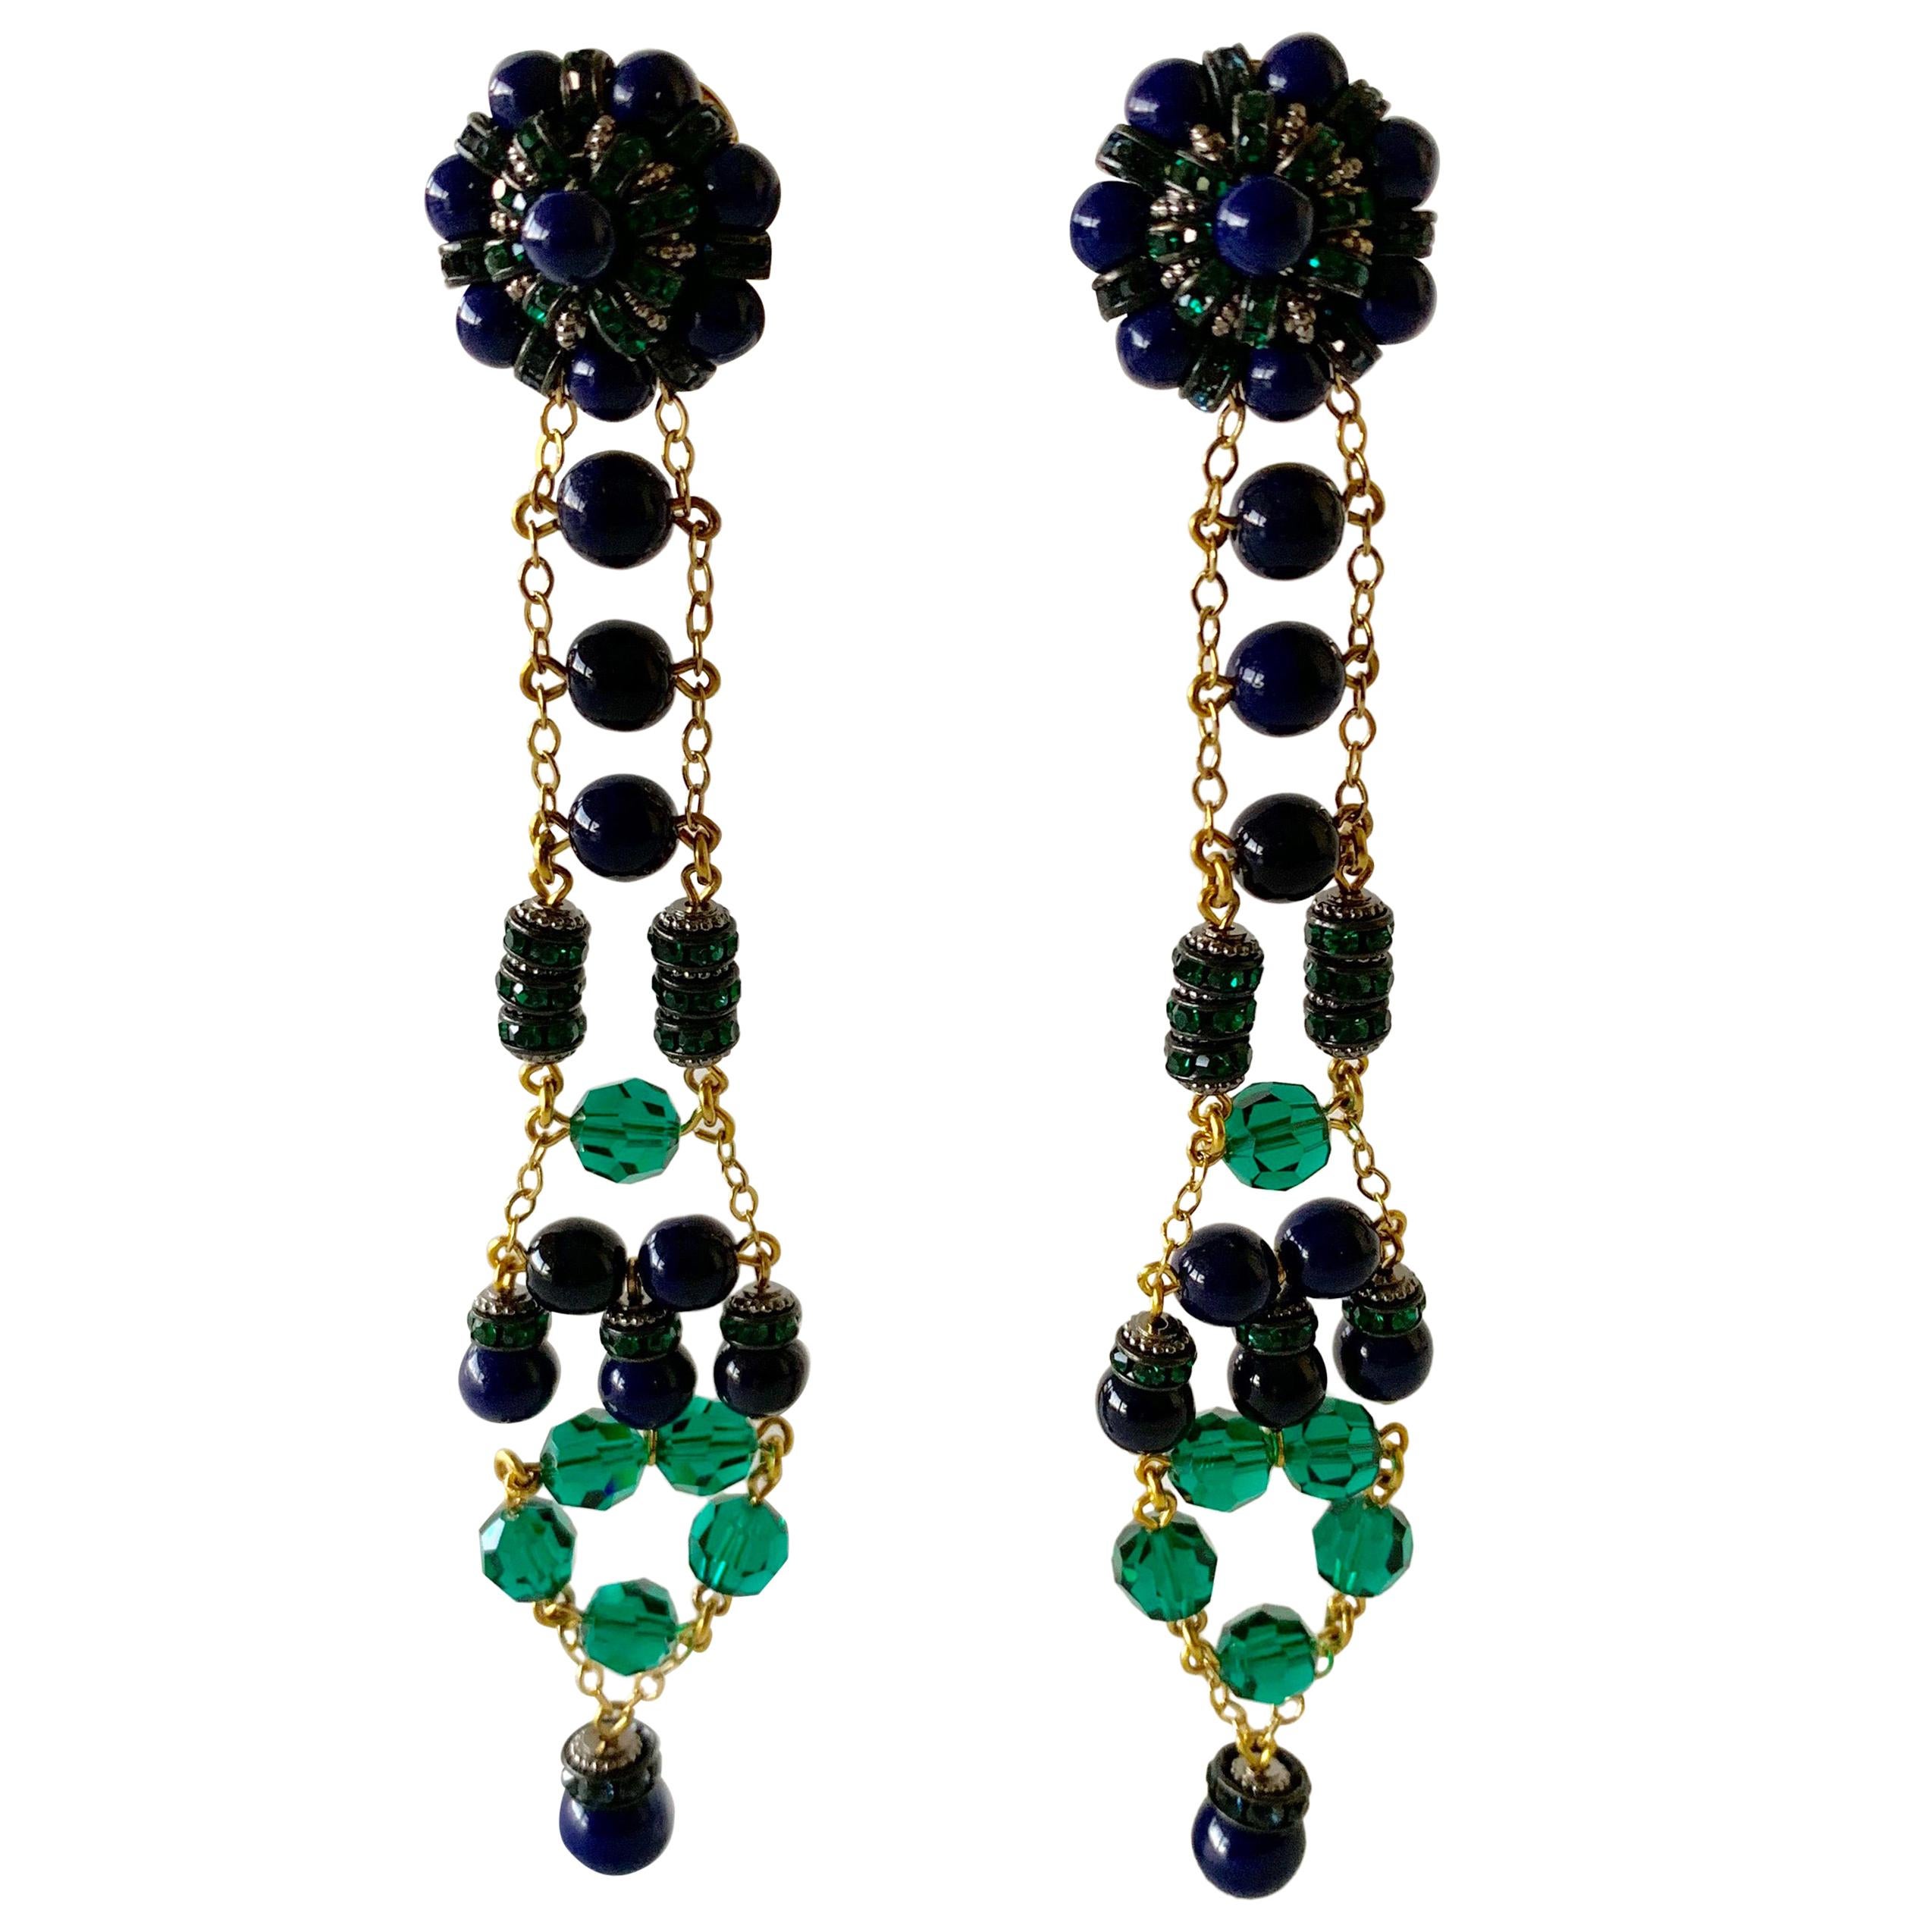 Contemporary Green and Navy  Gilt Chandelier Statement Earrings